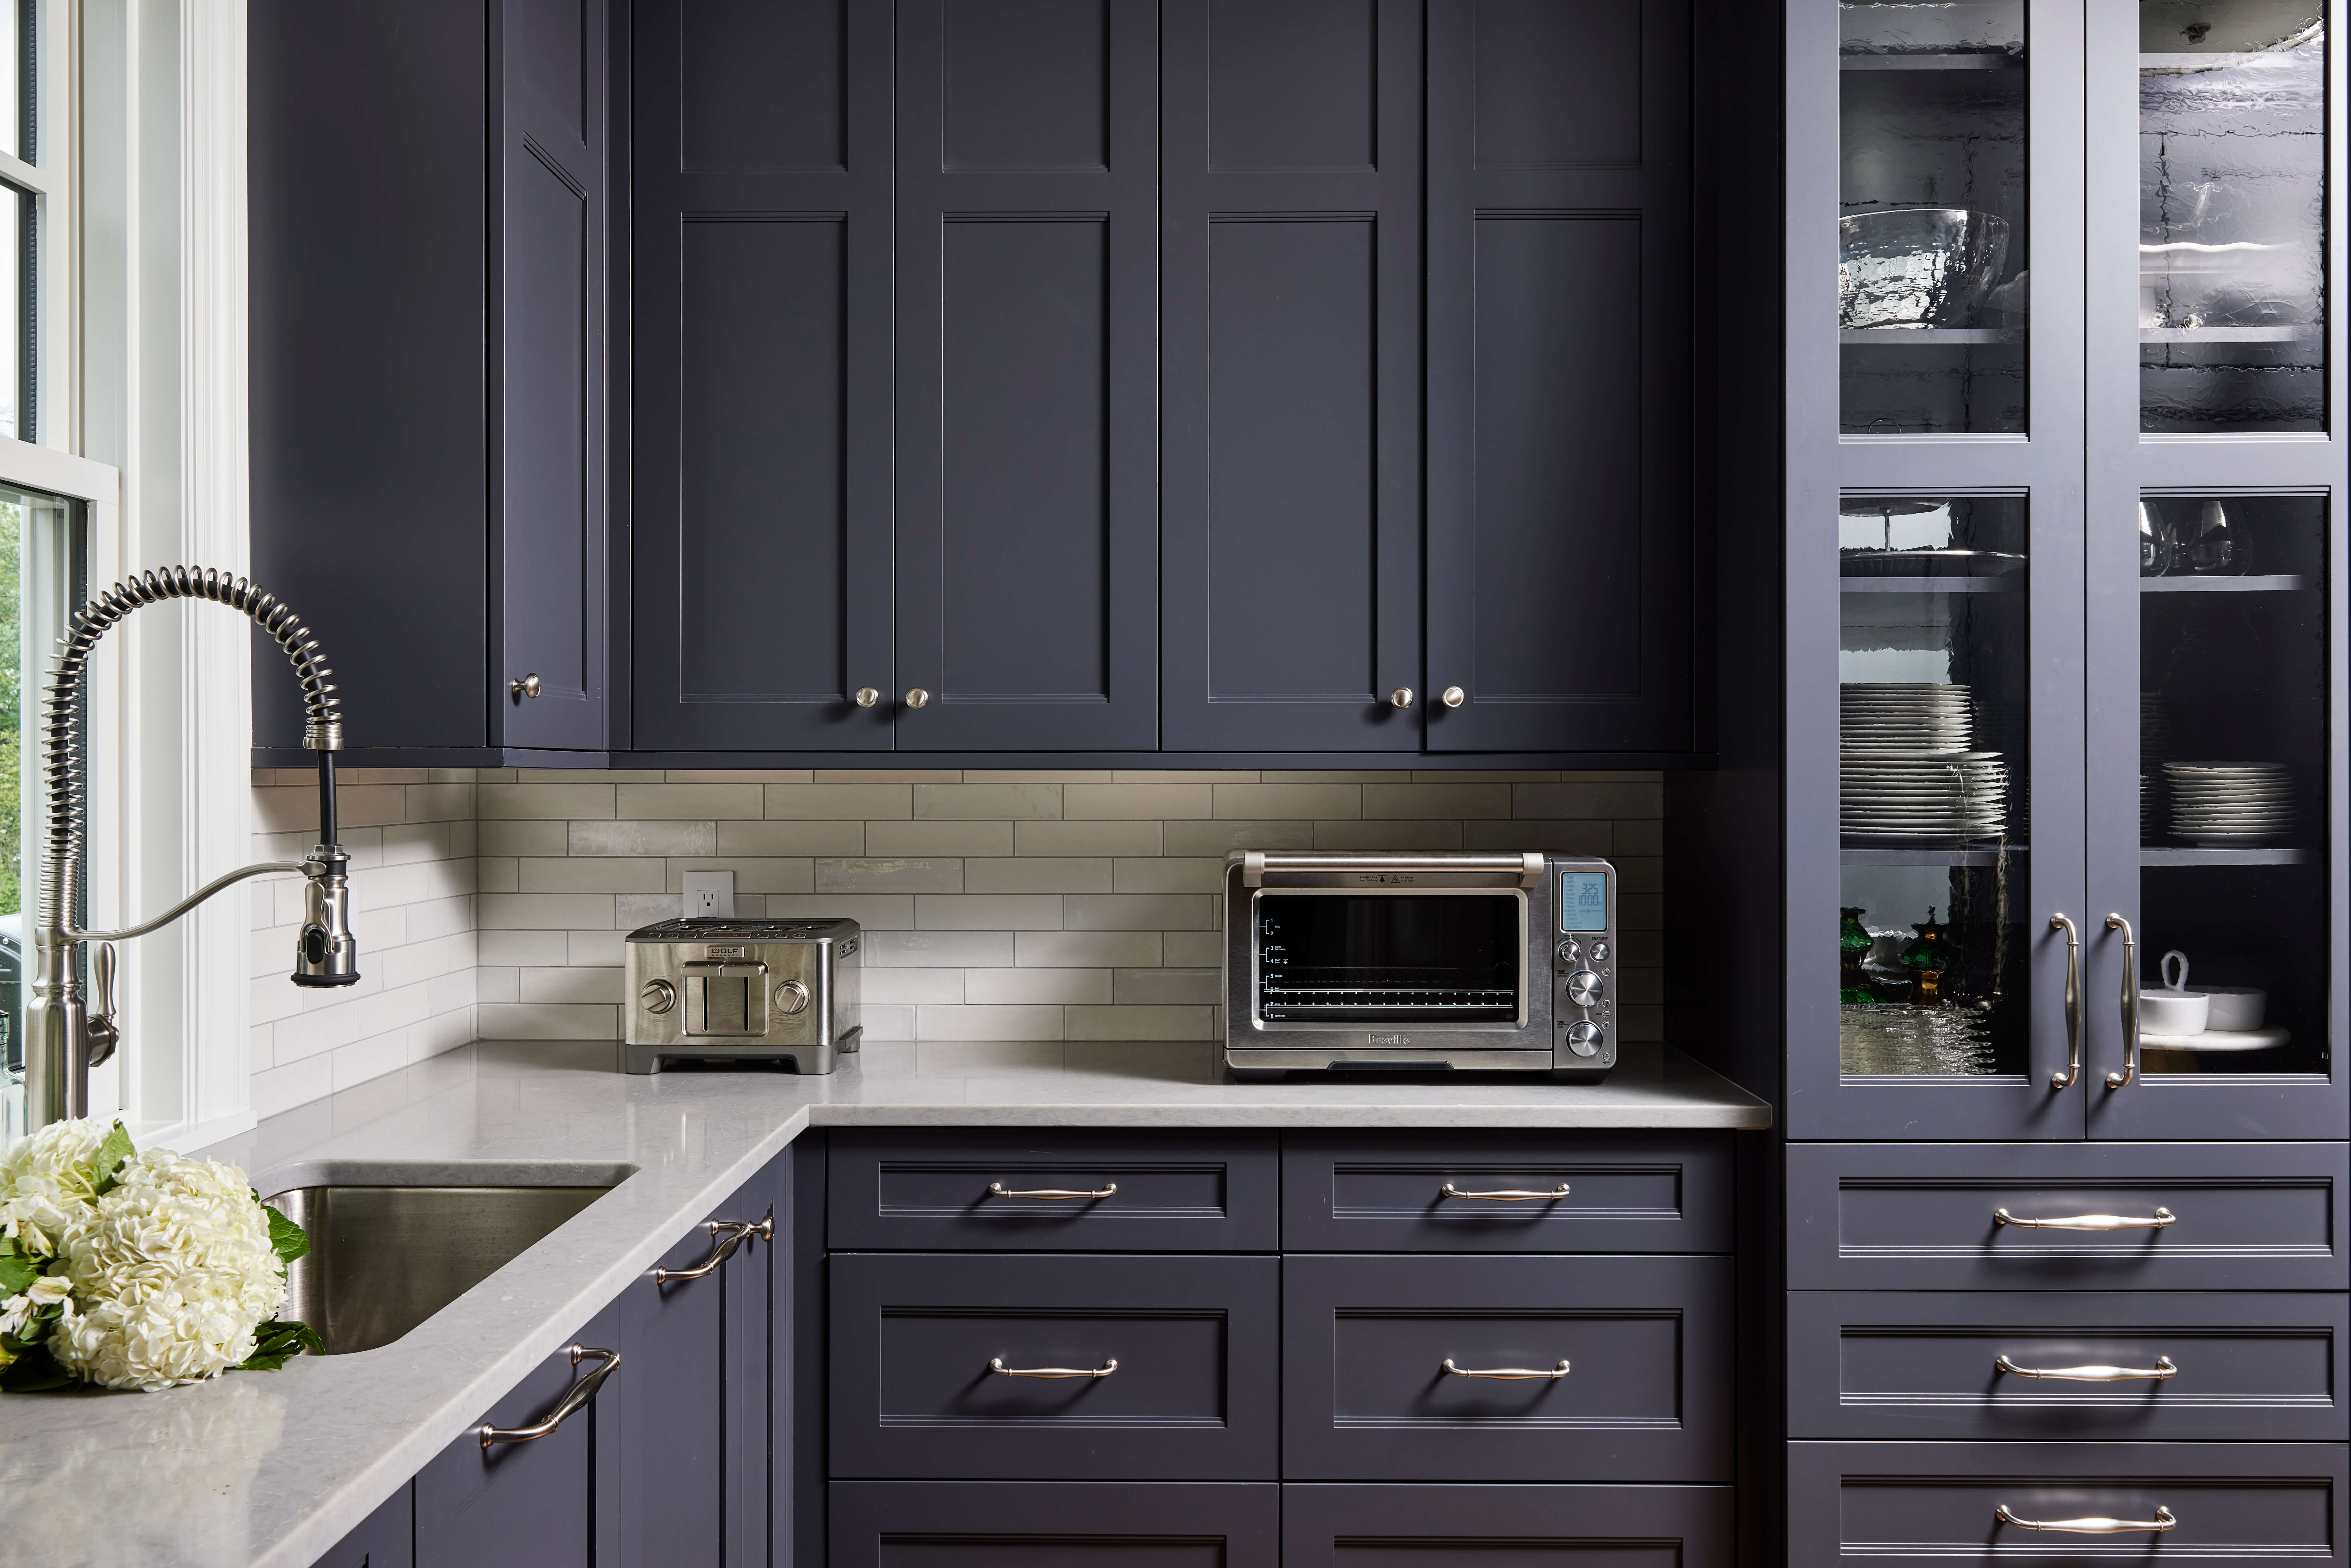 Dark Gray and Navy Blue kitchen cabinets that are almost black.